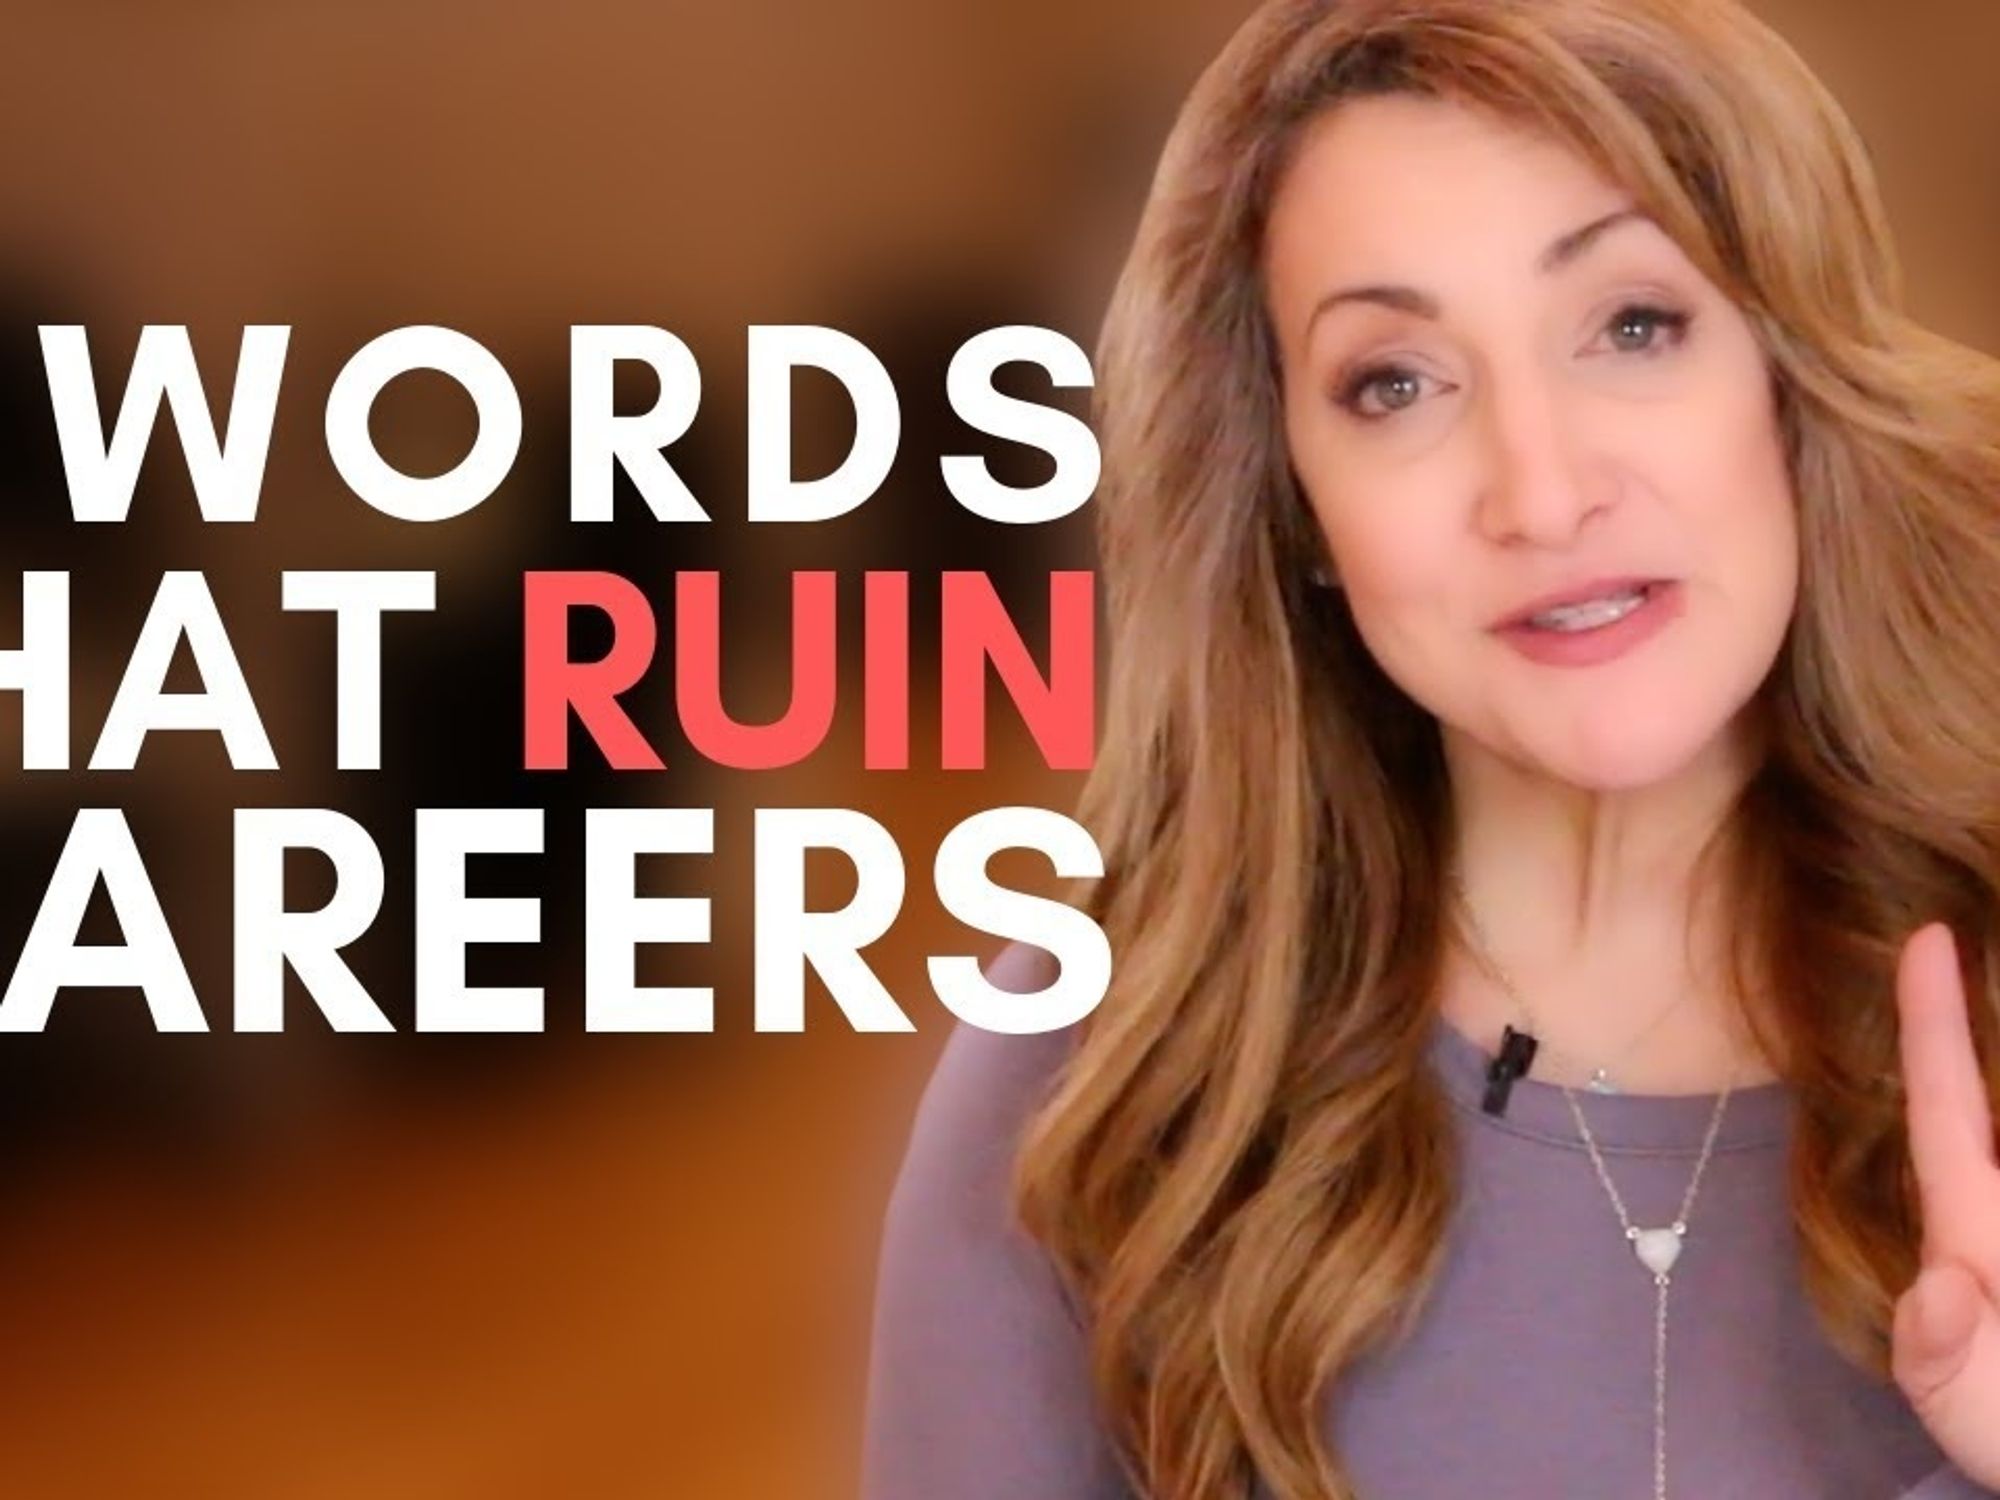 These Are The 4 Words That Could RUIN Your Career!